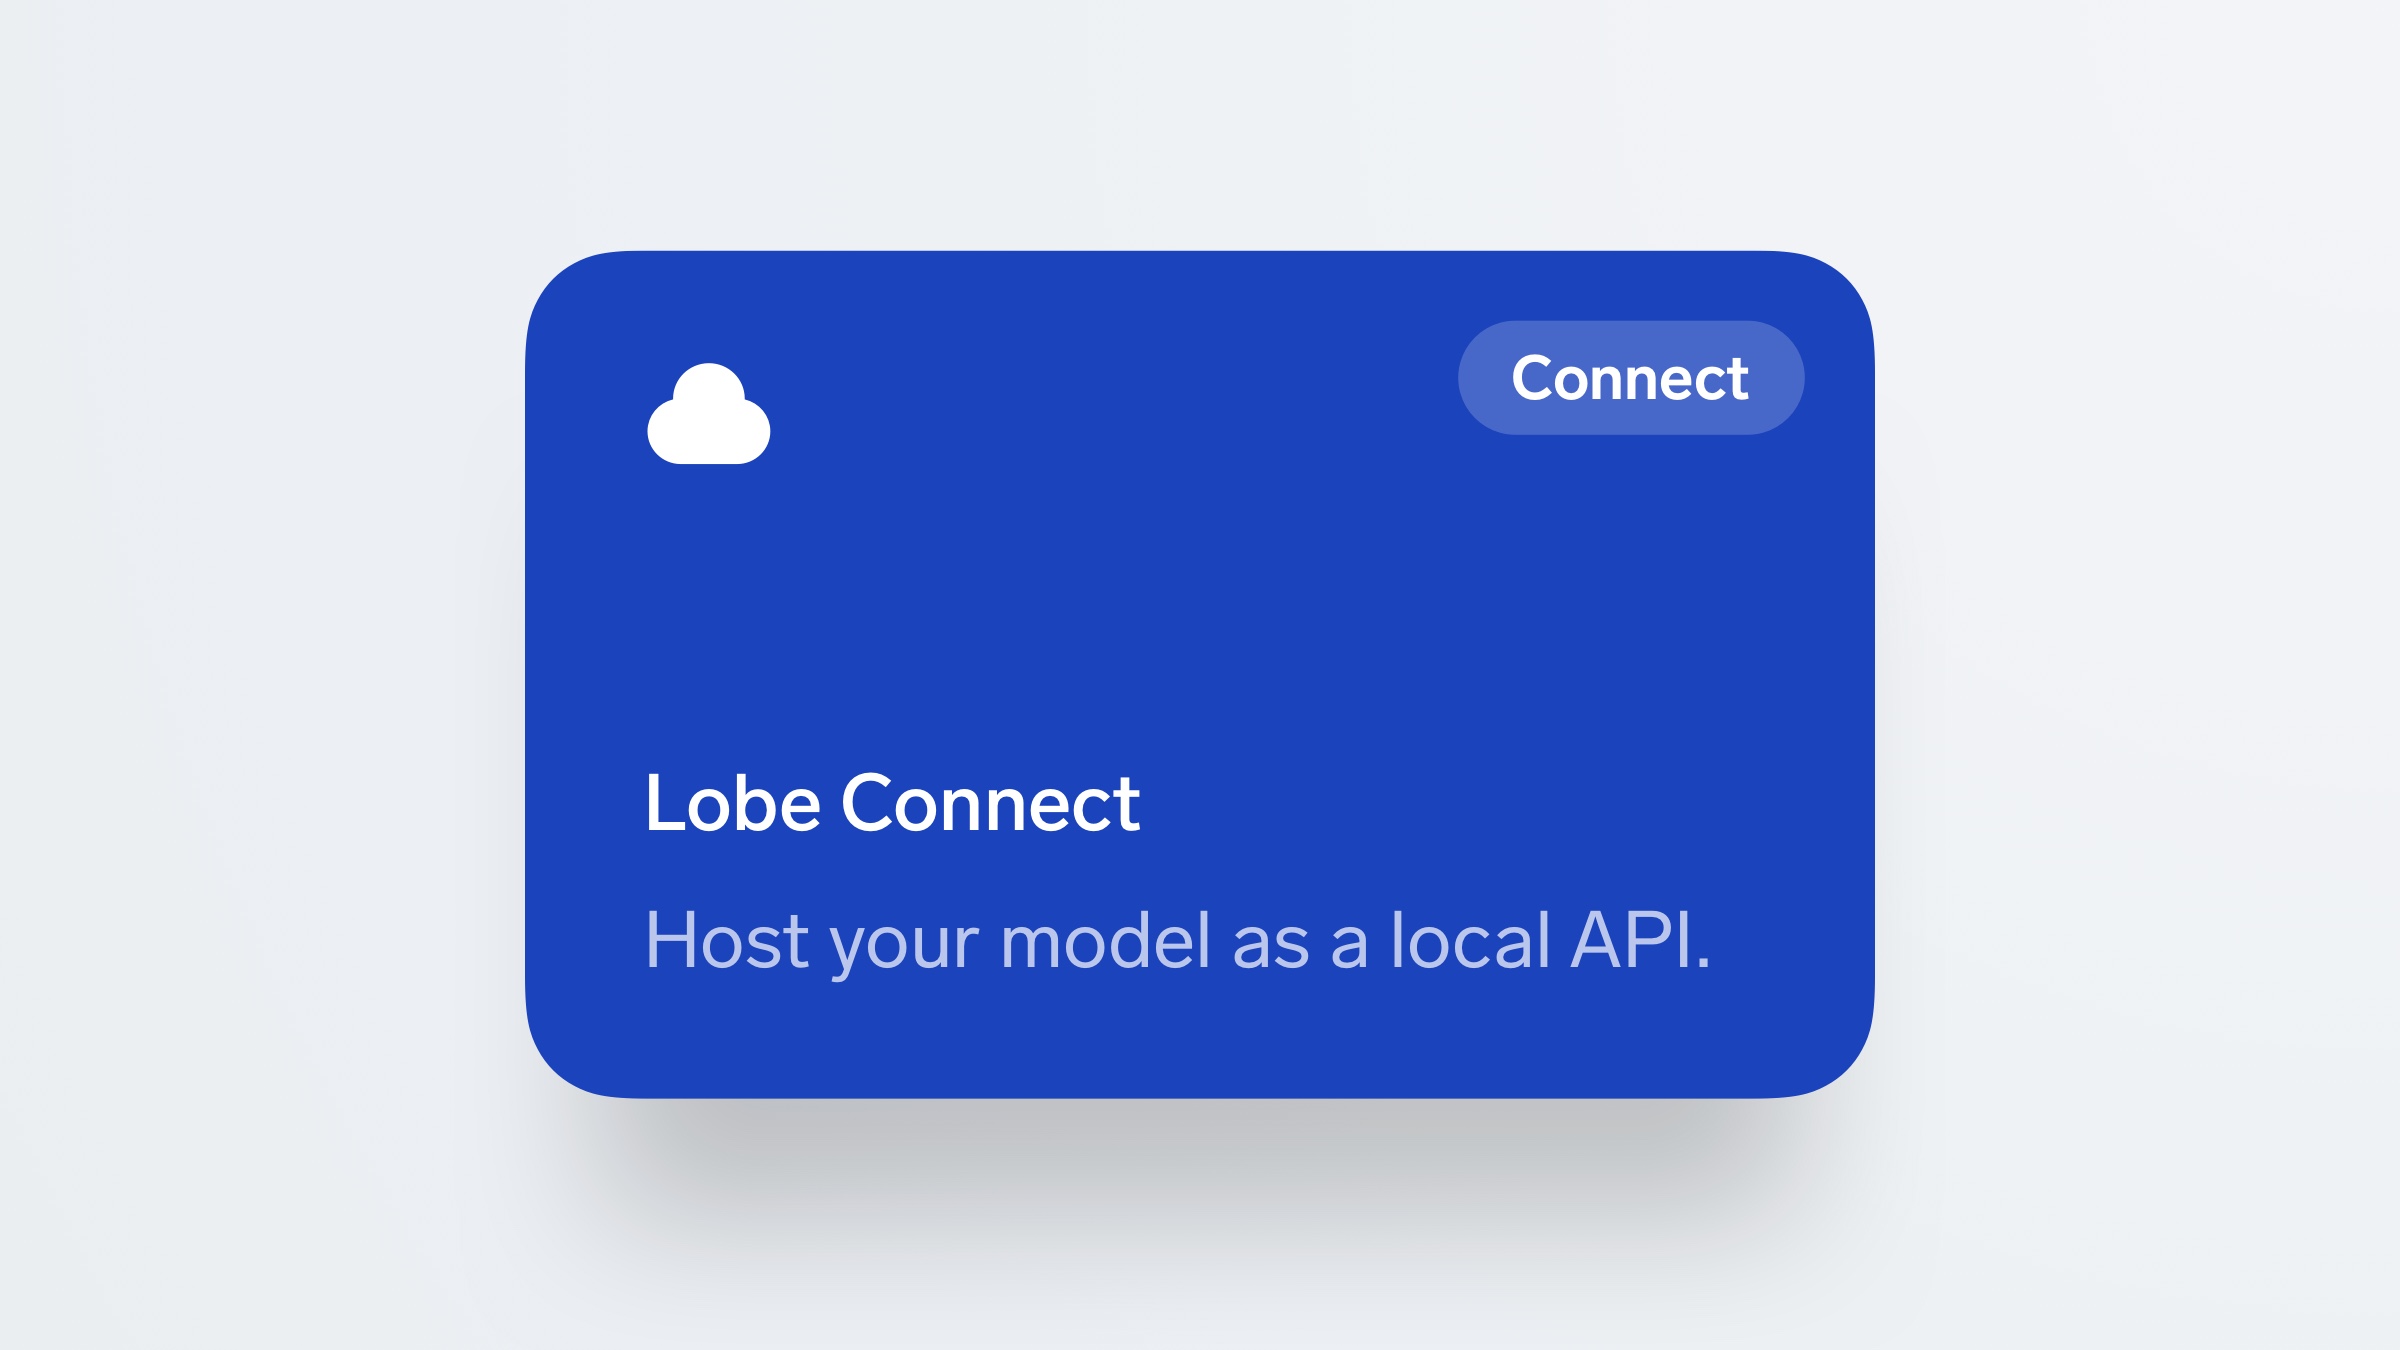 Connect your model with your app using the Lobe Connect card in the Use tab.